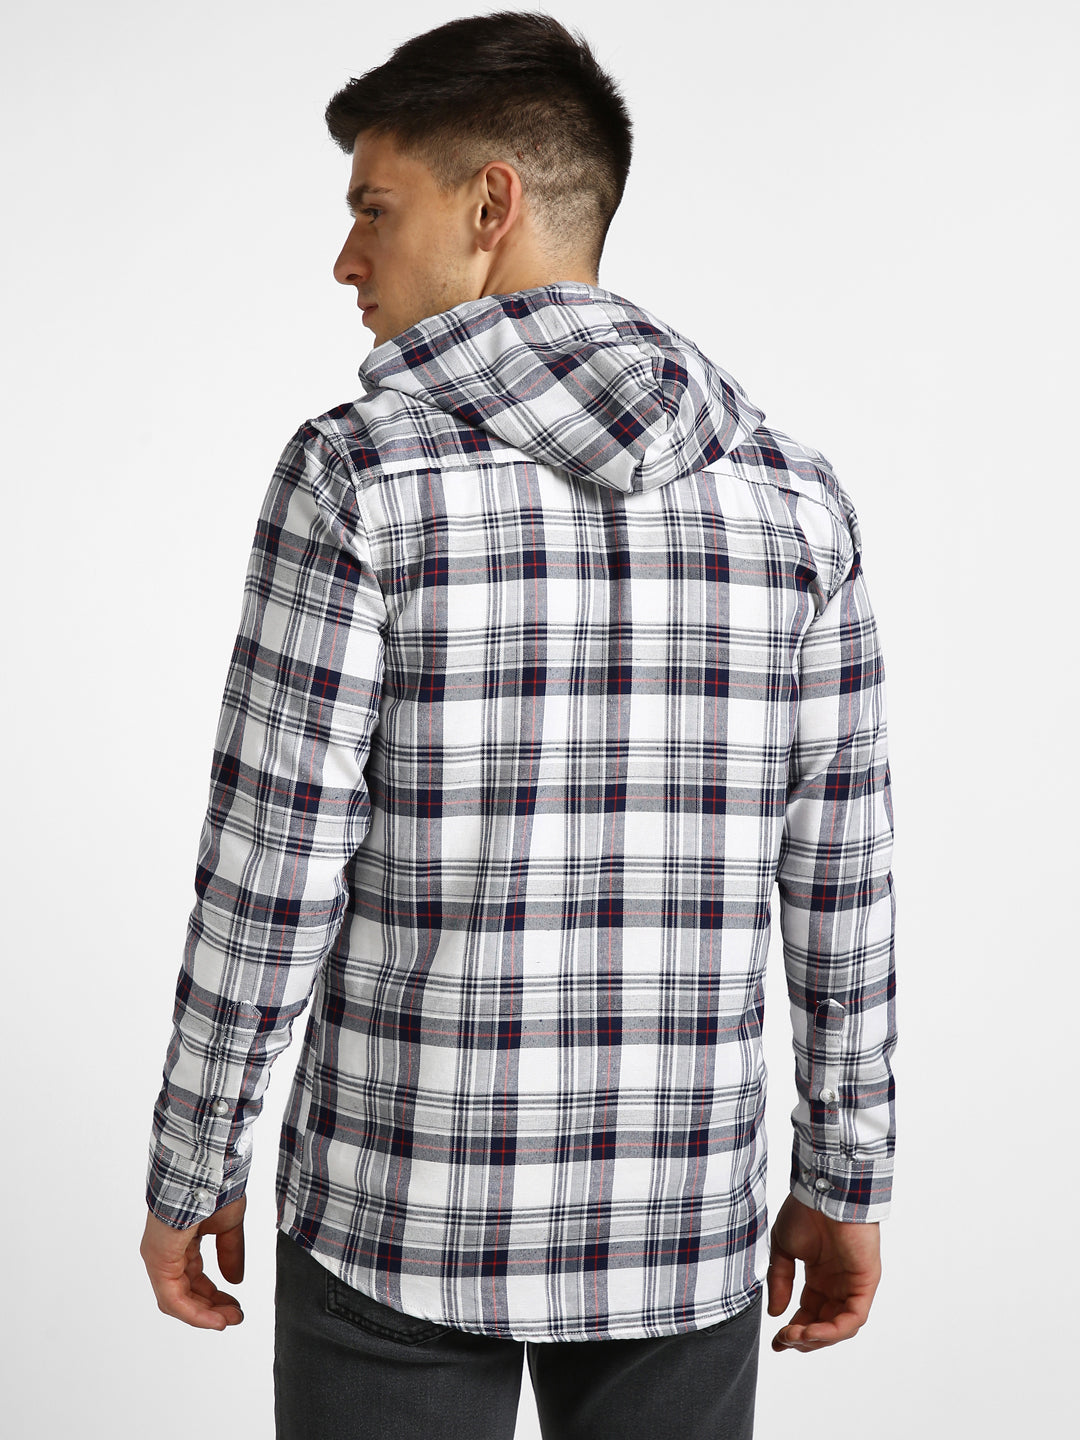 Urbano Fashion Men's White Cotton Full Sleeve Slim Fit Casual Checkered Shirt with Hooded Collar